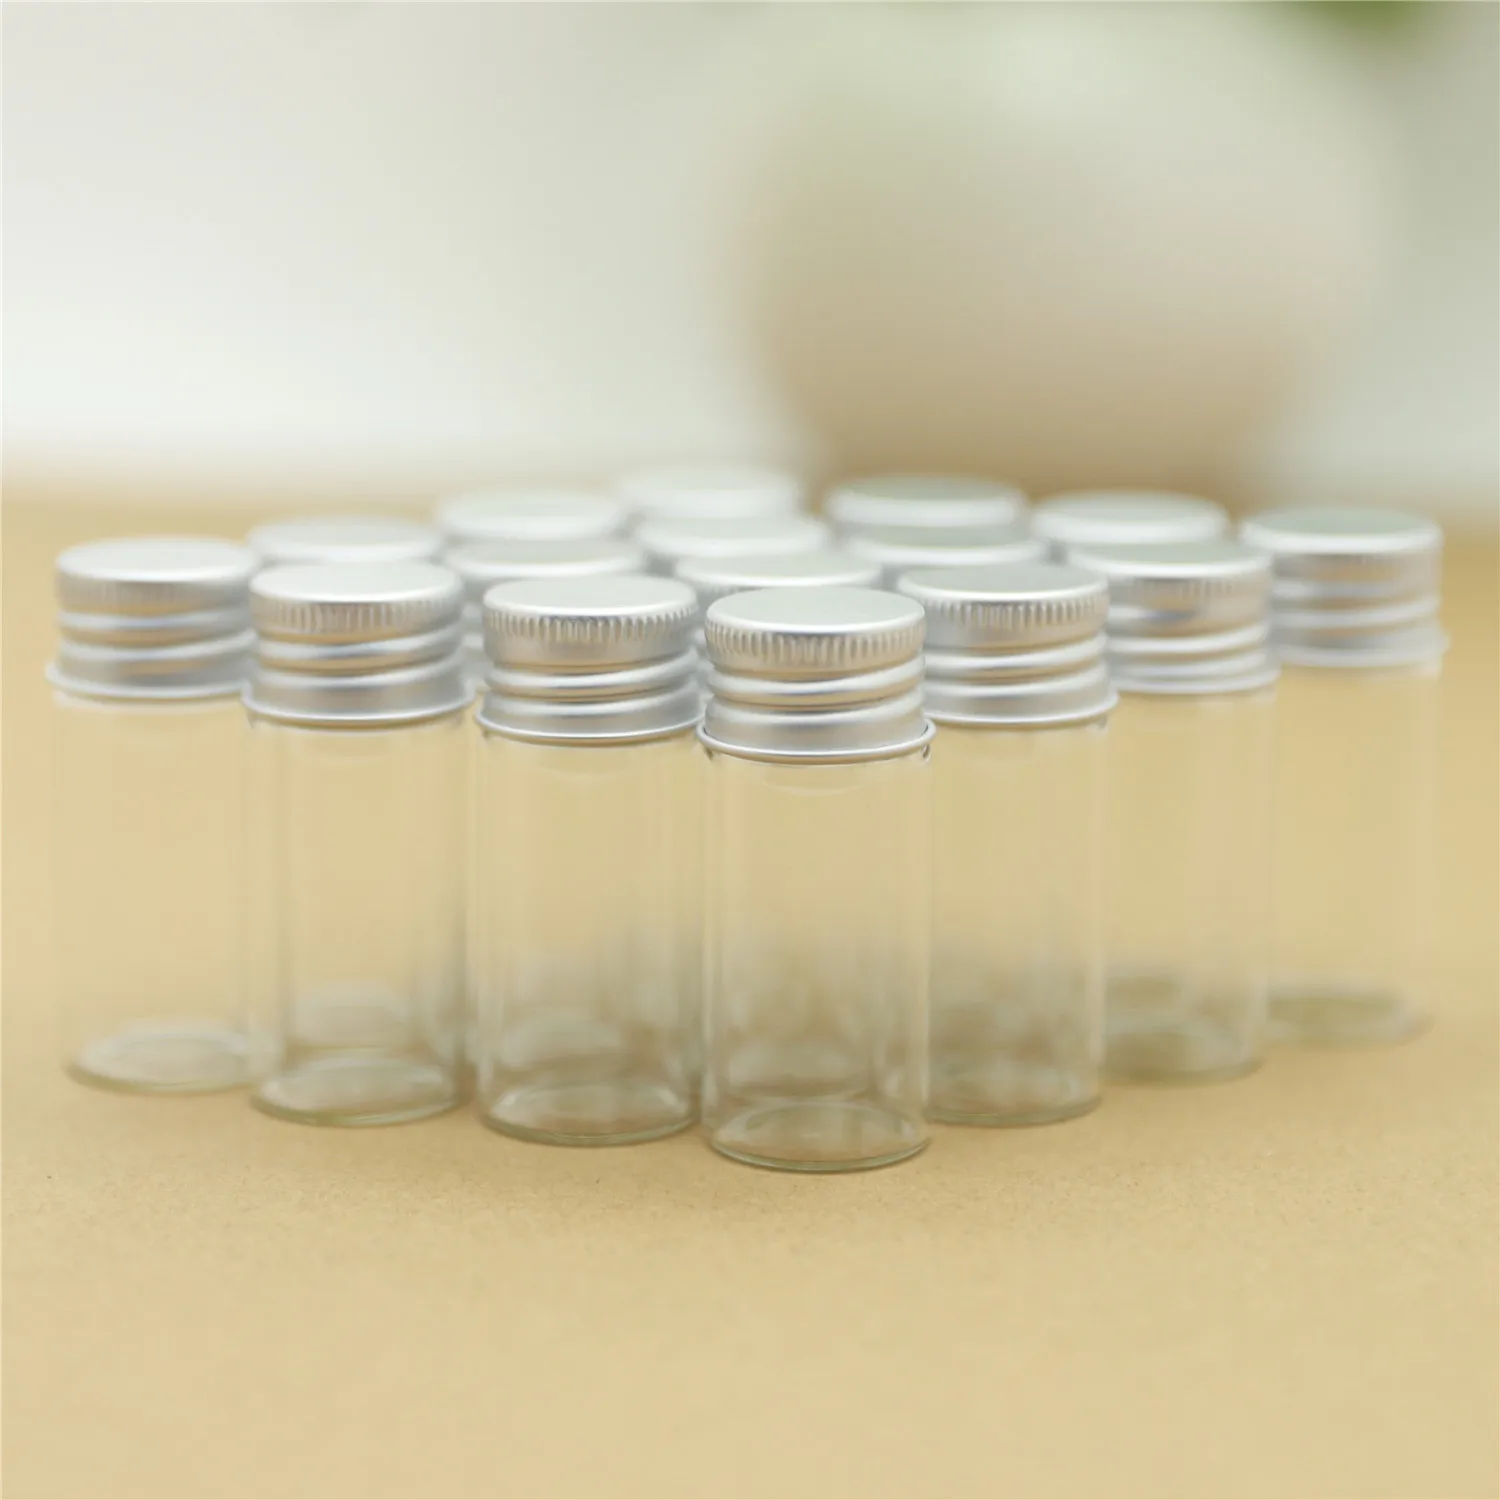 

24 Pieces 22*50mm 10ml Small Glass Bottle Test tube Silver Screw Cap storage bottles jar Glass Jars Mini Containers Vial Bottles